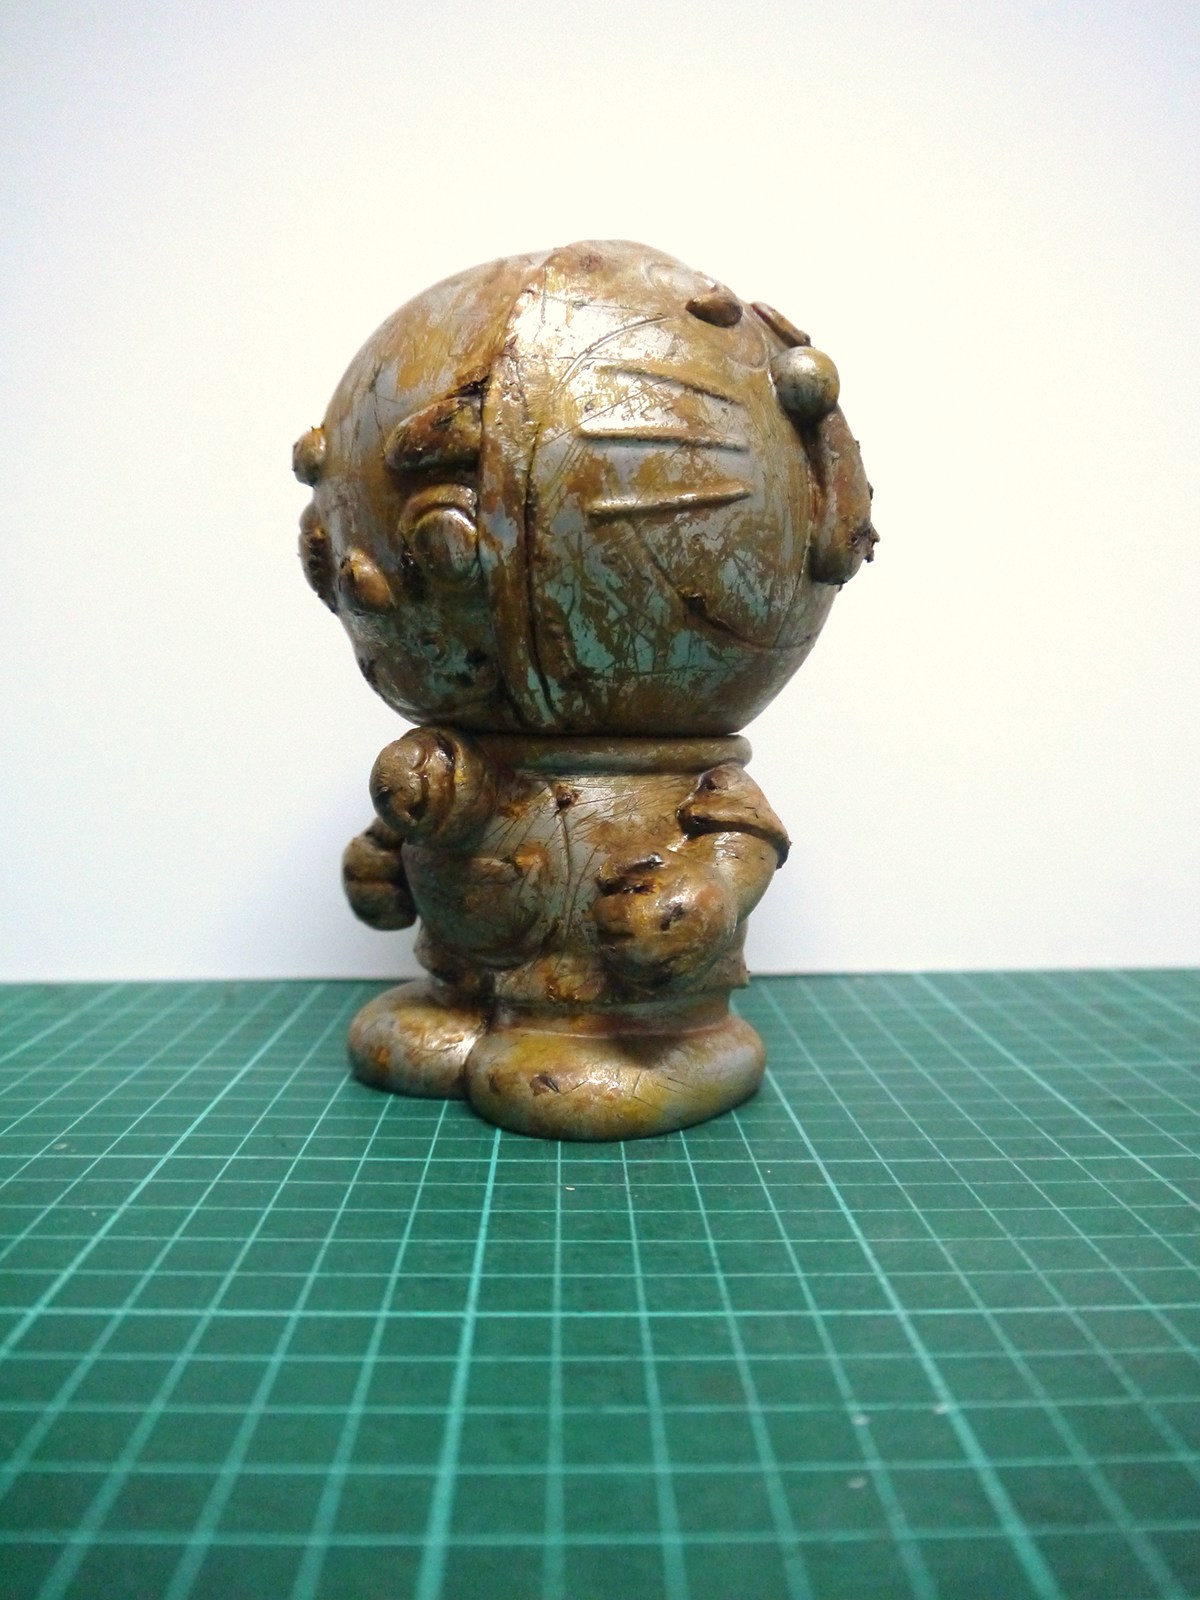 Doraemon toy customization ahboy rusted